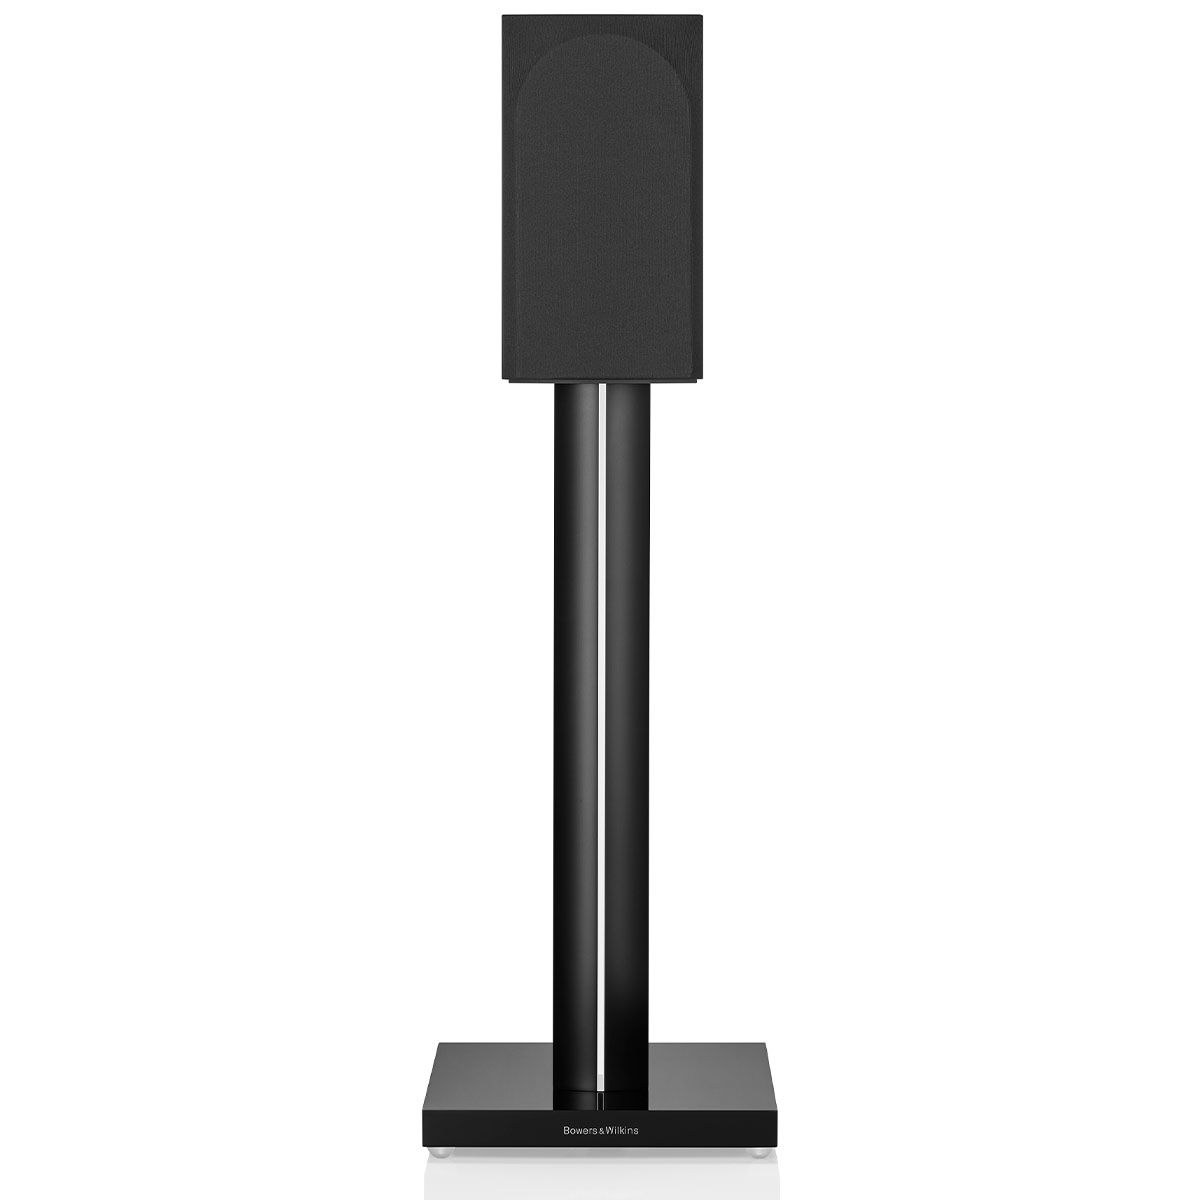 Bowers & Wilkins 707 S3 2-Way Stand Mount Bookshelf Loudspeakers - Gloss Black - on stand with grille